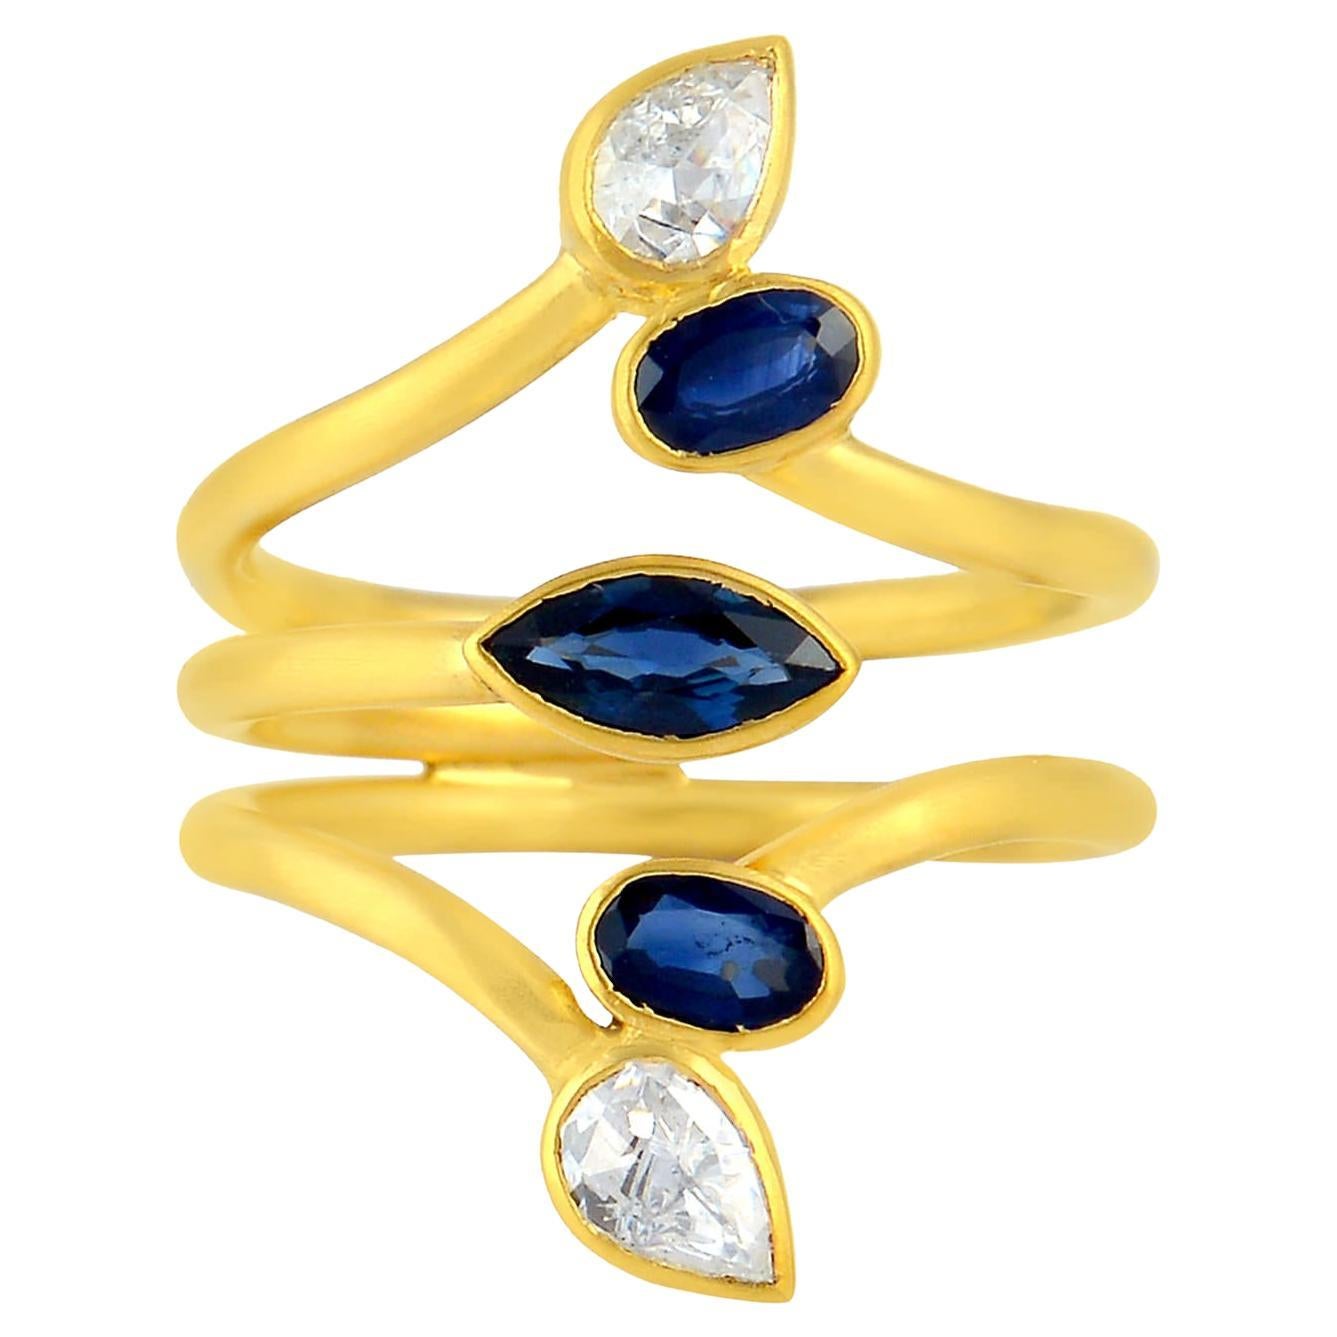 Multi Shaped Blue Sapphire Knuckle Ring With Pear Shaped Diamonds In 18k Gold